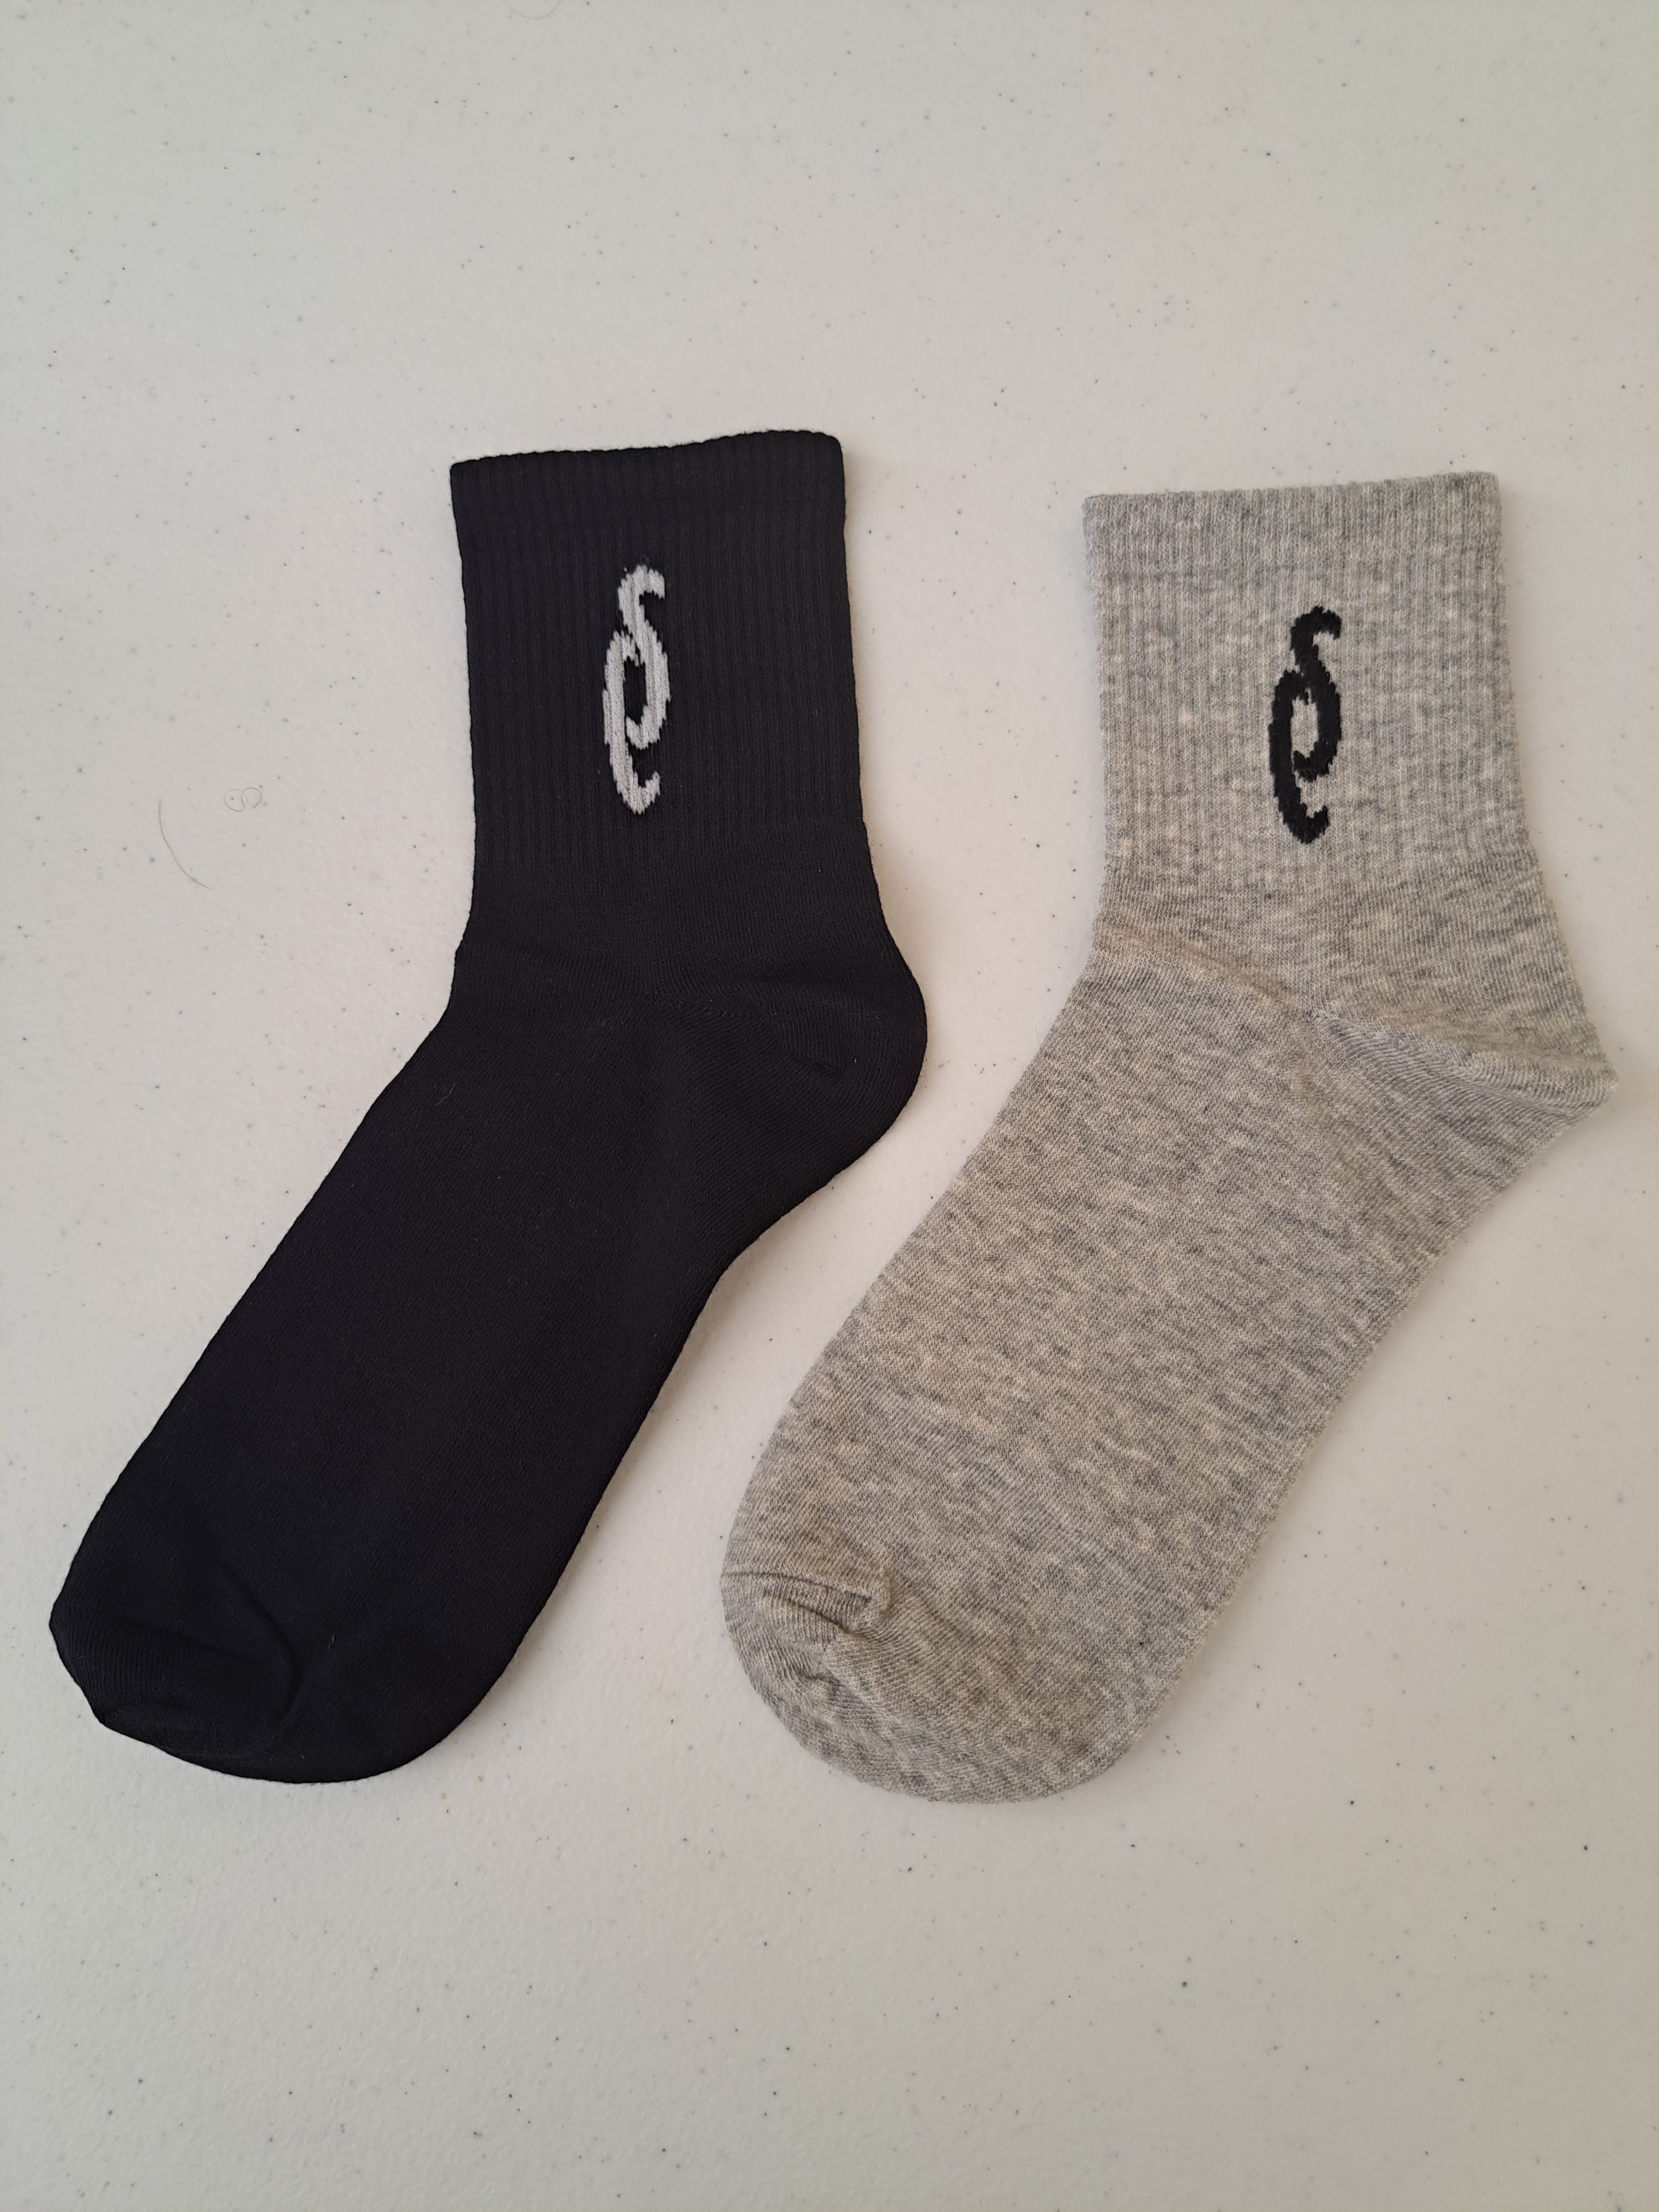 Crew High Cut & Ankle Low Cut Logo Socks 6 Pack - SPEED OF CHOICE® 